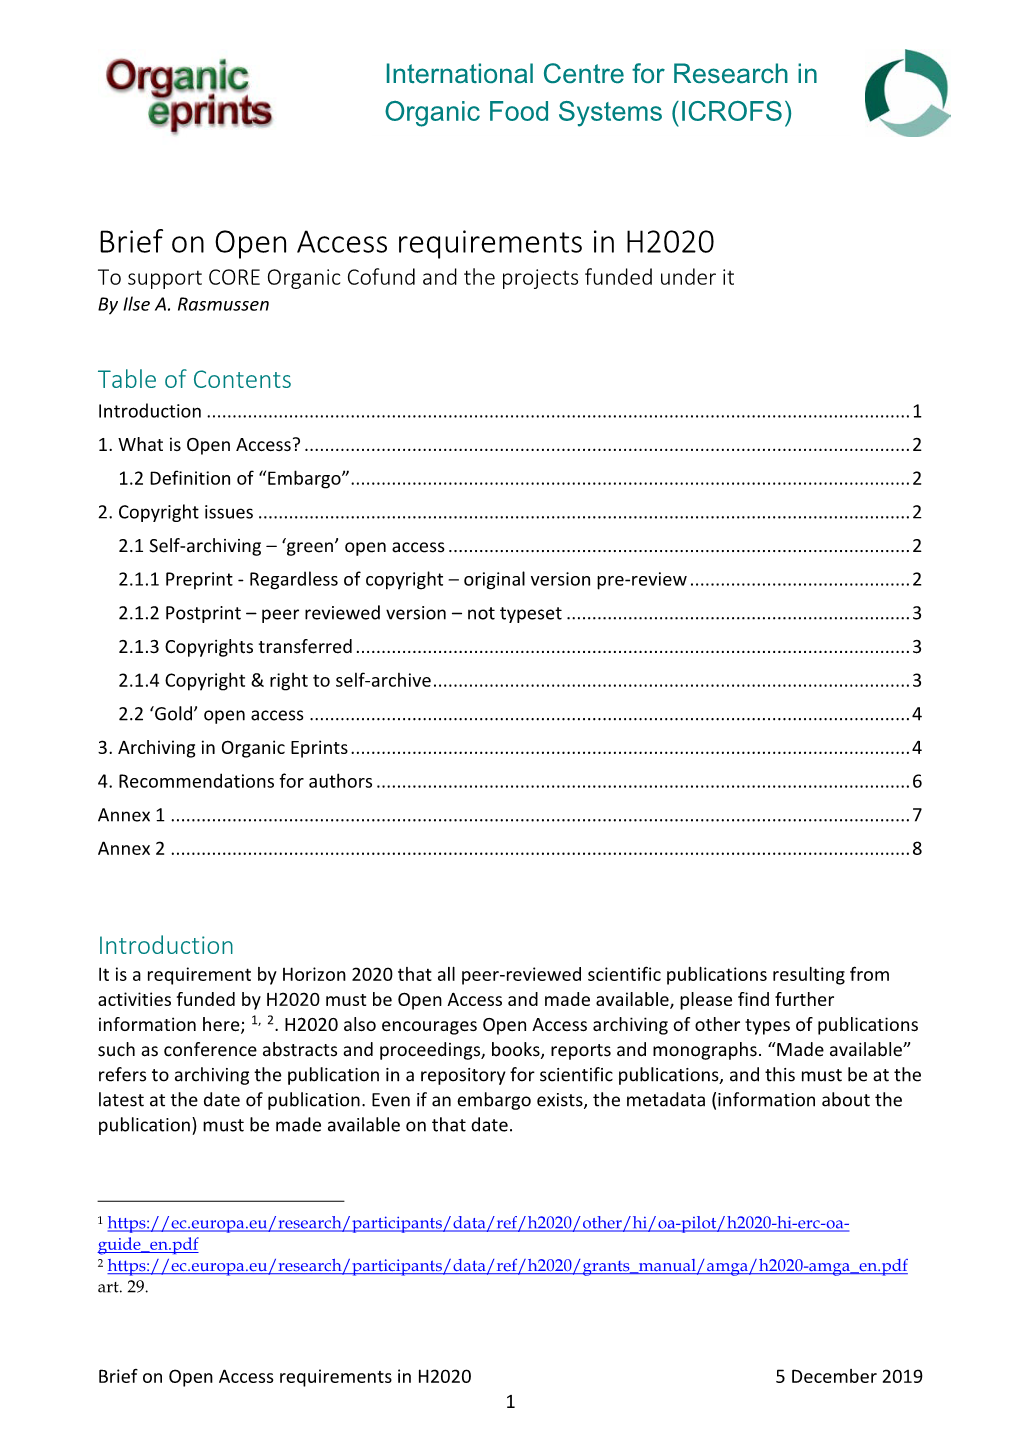 Brief on Open Access Requirements in H2020 to Support CORE Organic Cofund and the Projects Funded Under It by Ilse A